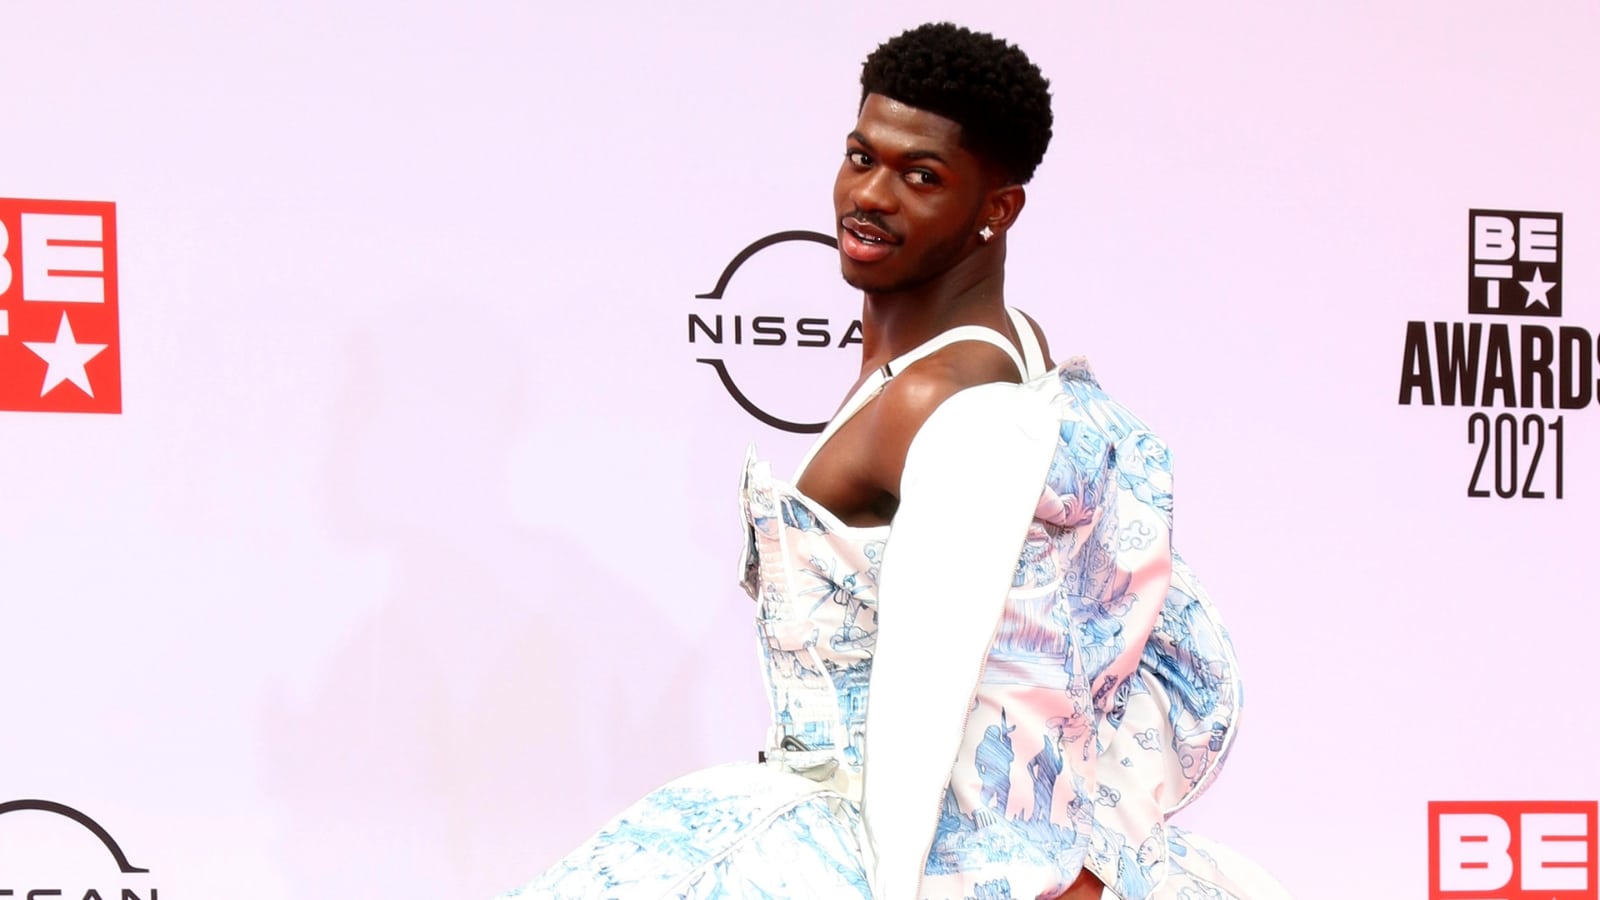 LOS ANGELES - JUN 27: Lil Nas X at the BET Awards 2021 Arrivals at the Microsoft Theater on June 27, 2021 in Los Angeles, CA